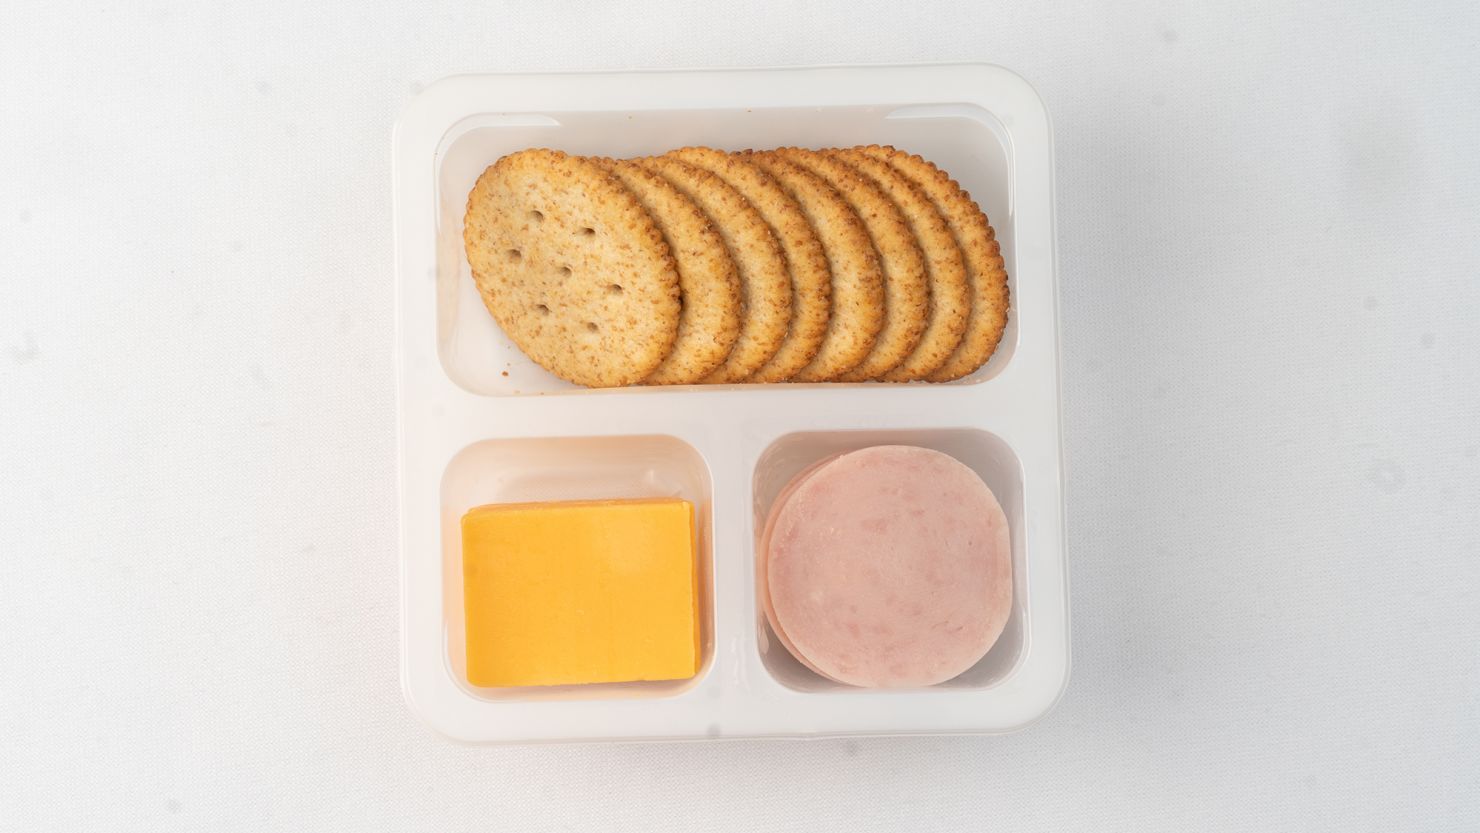 Consumer Reports has petitioned the USDA to remove school Lunchables from school lunch programs because of excessive sodium.